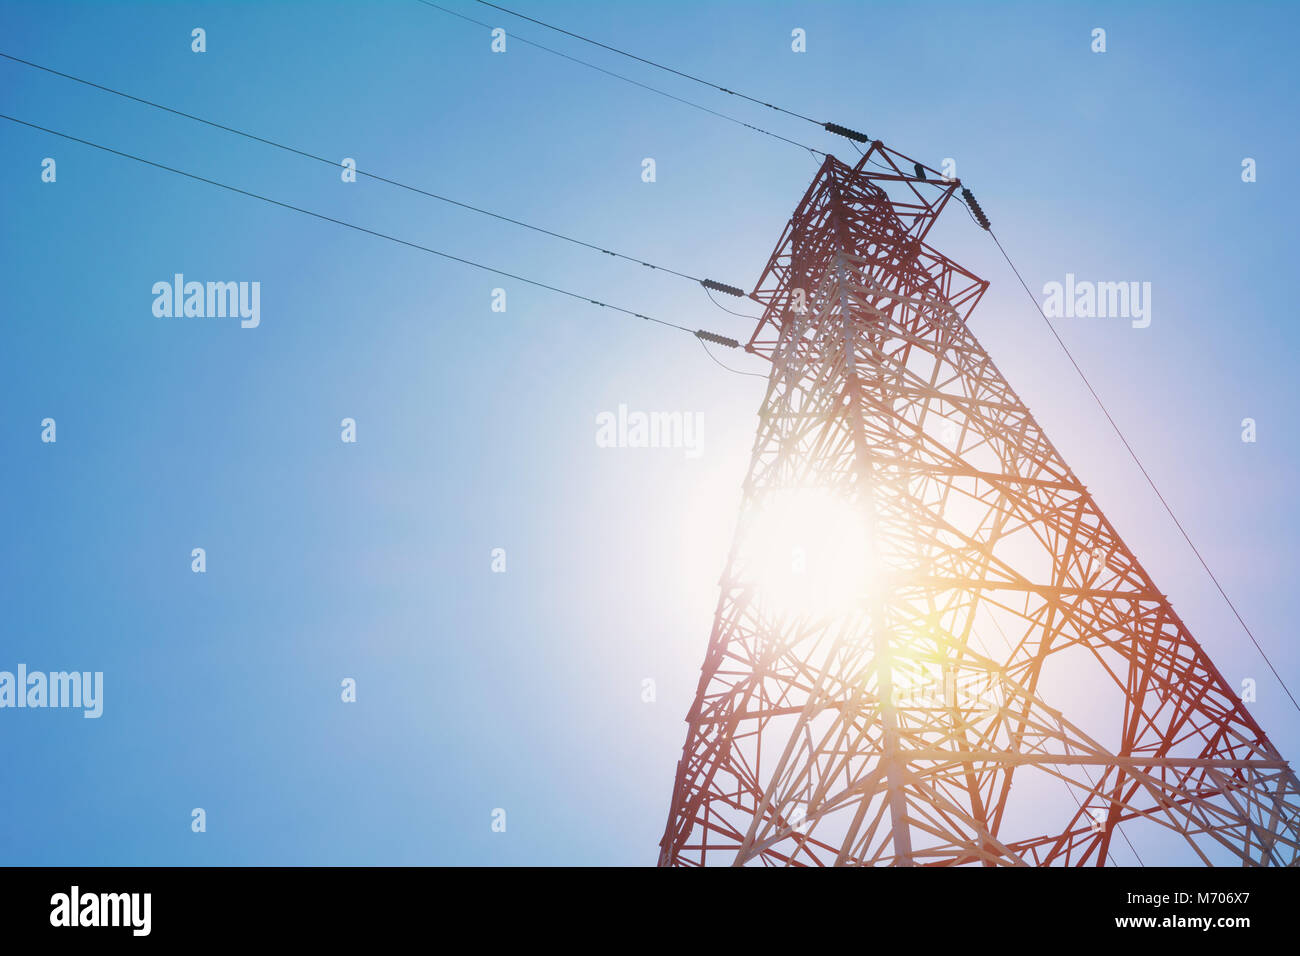 High voltage pole on blue sky background. High voltage tower. Stock Photo